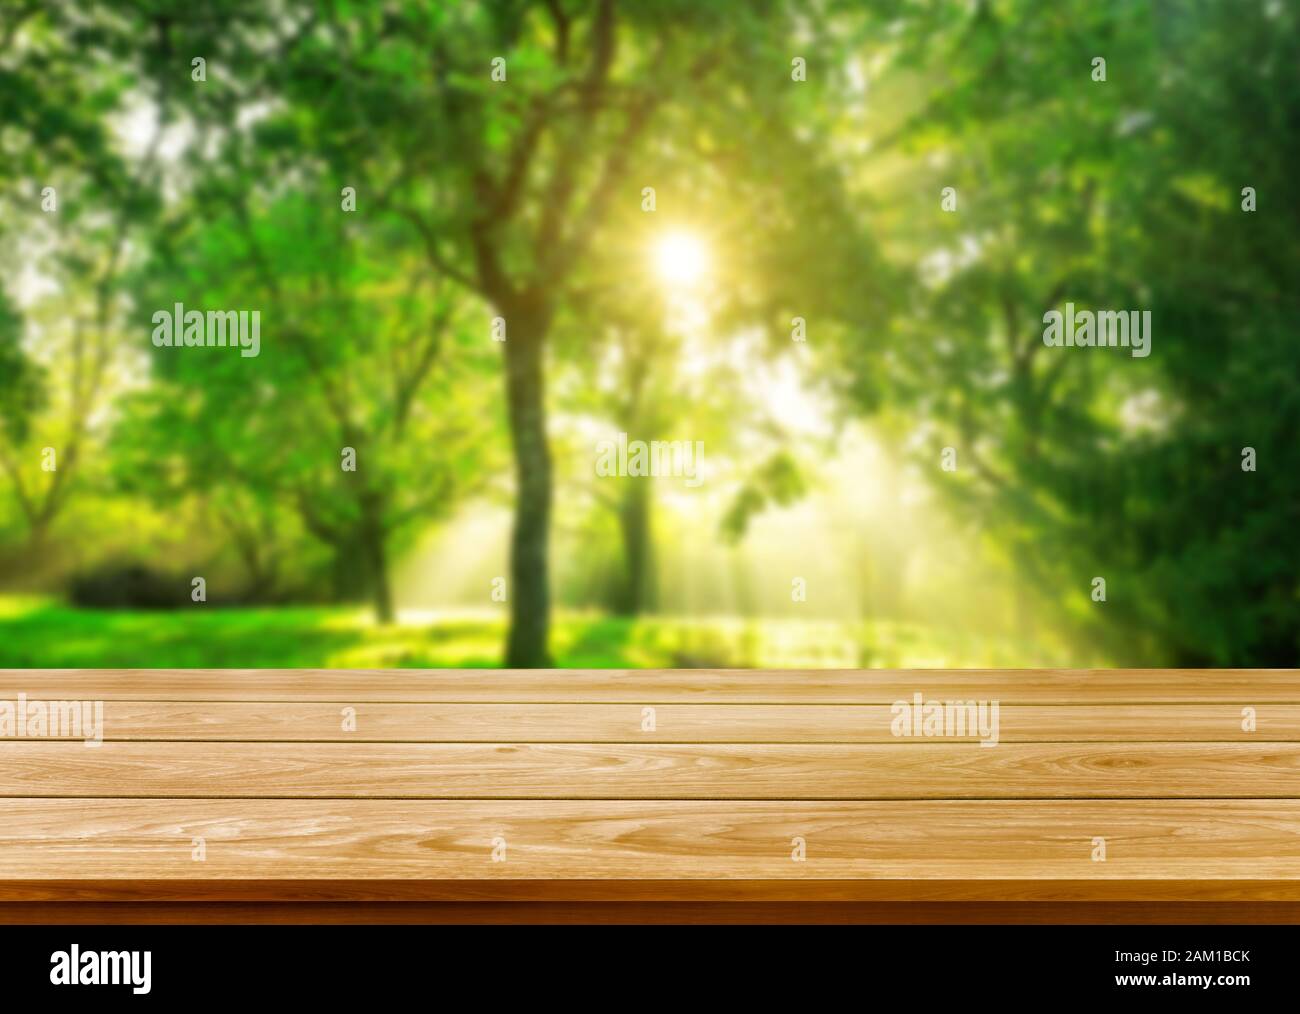 Brown wood table in green blur nature background of trees and grass in the park with empty copy space on the table for product display mockup. Fresh s Stock Photo